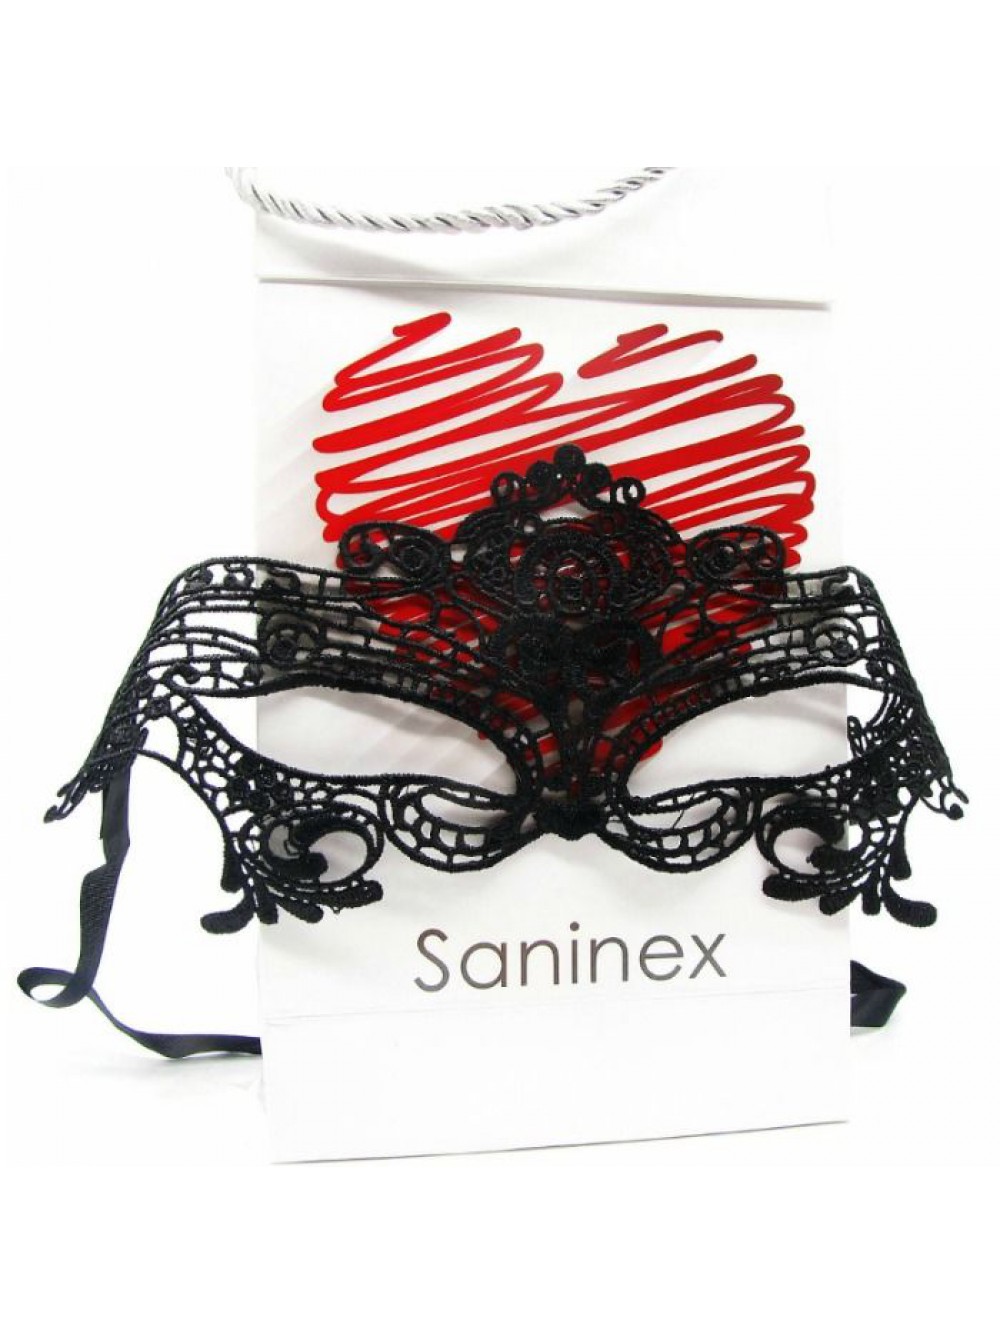 SANINEX MASK-EXCITING EXPERIENCE